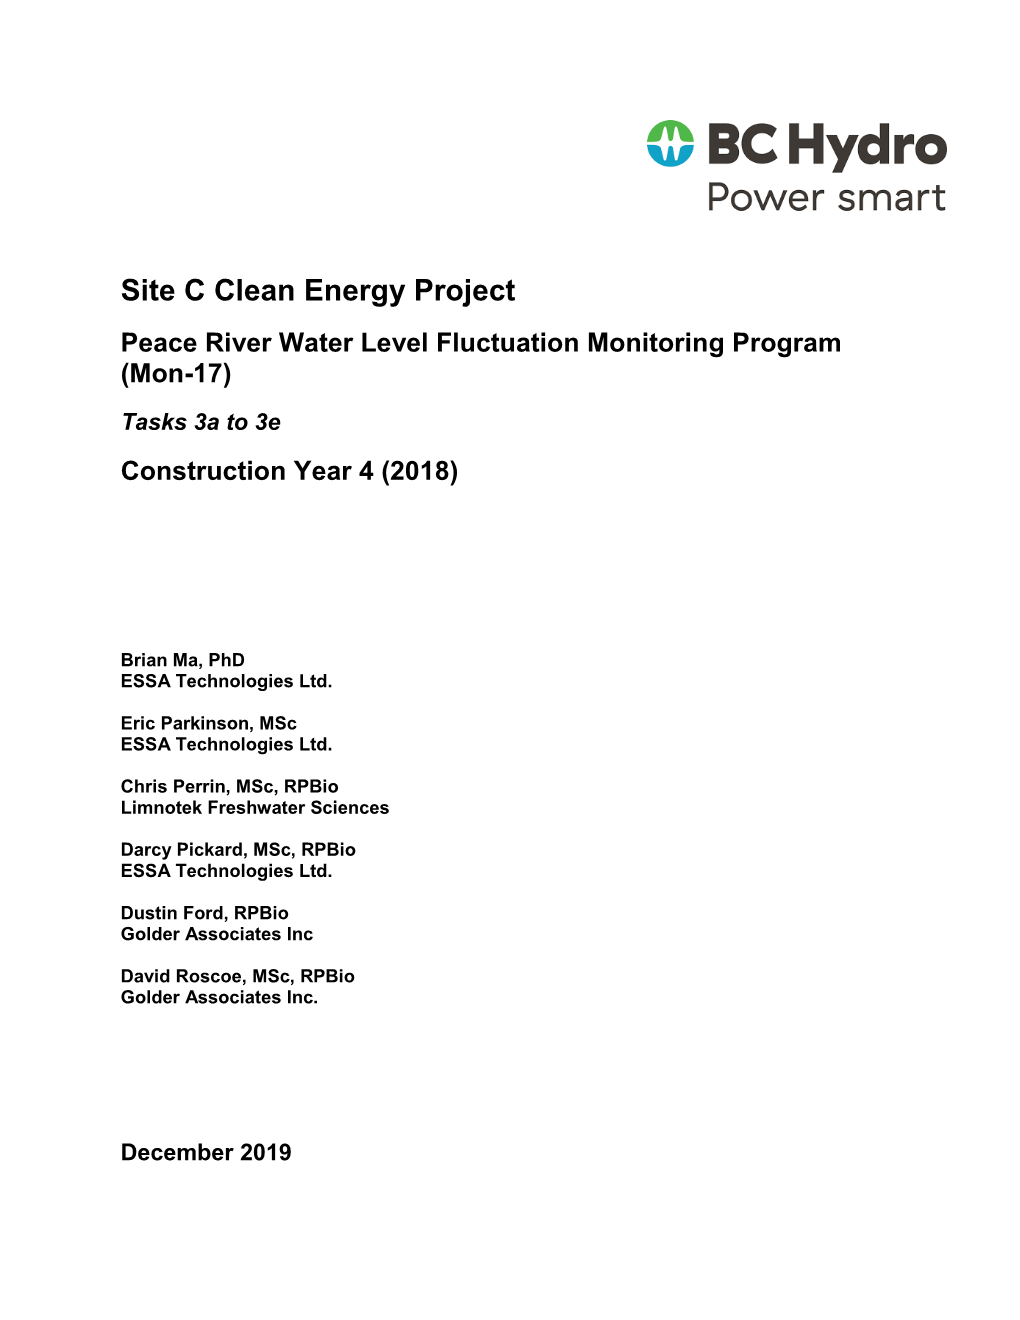 Site C Clean Energy Project Peace River Water Level Fluctuation Monitoring Program (Mon-17) Tasks 3A to 3E Construction Year 4 (2018)